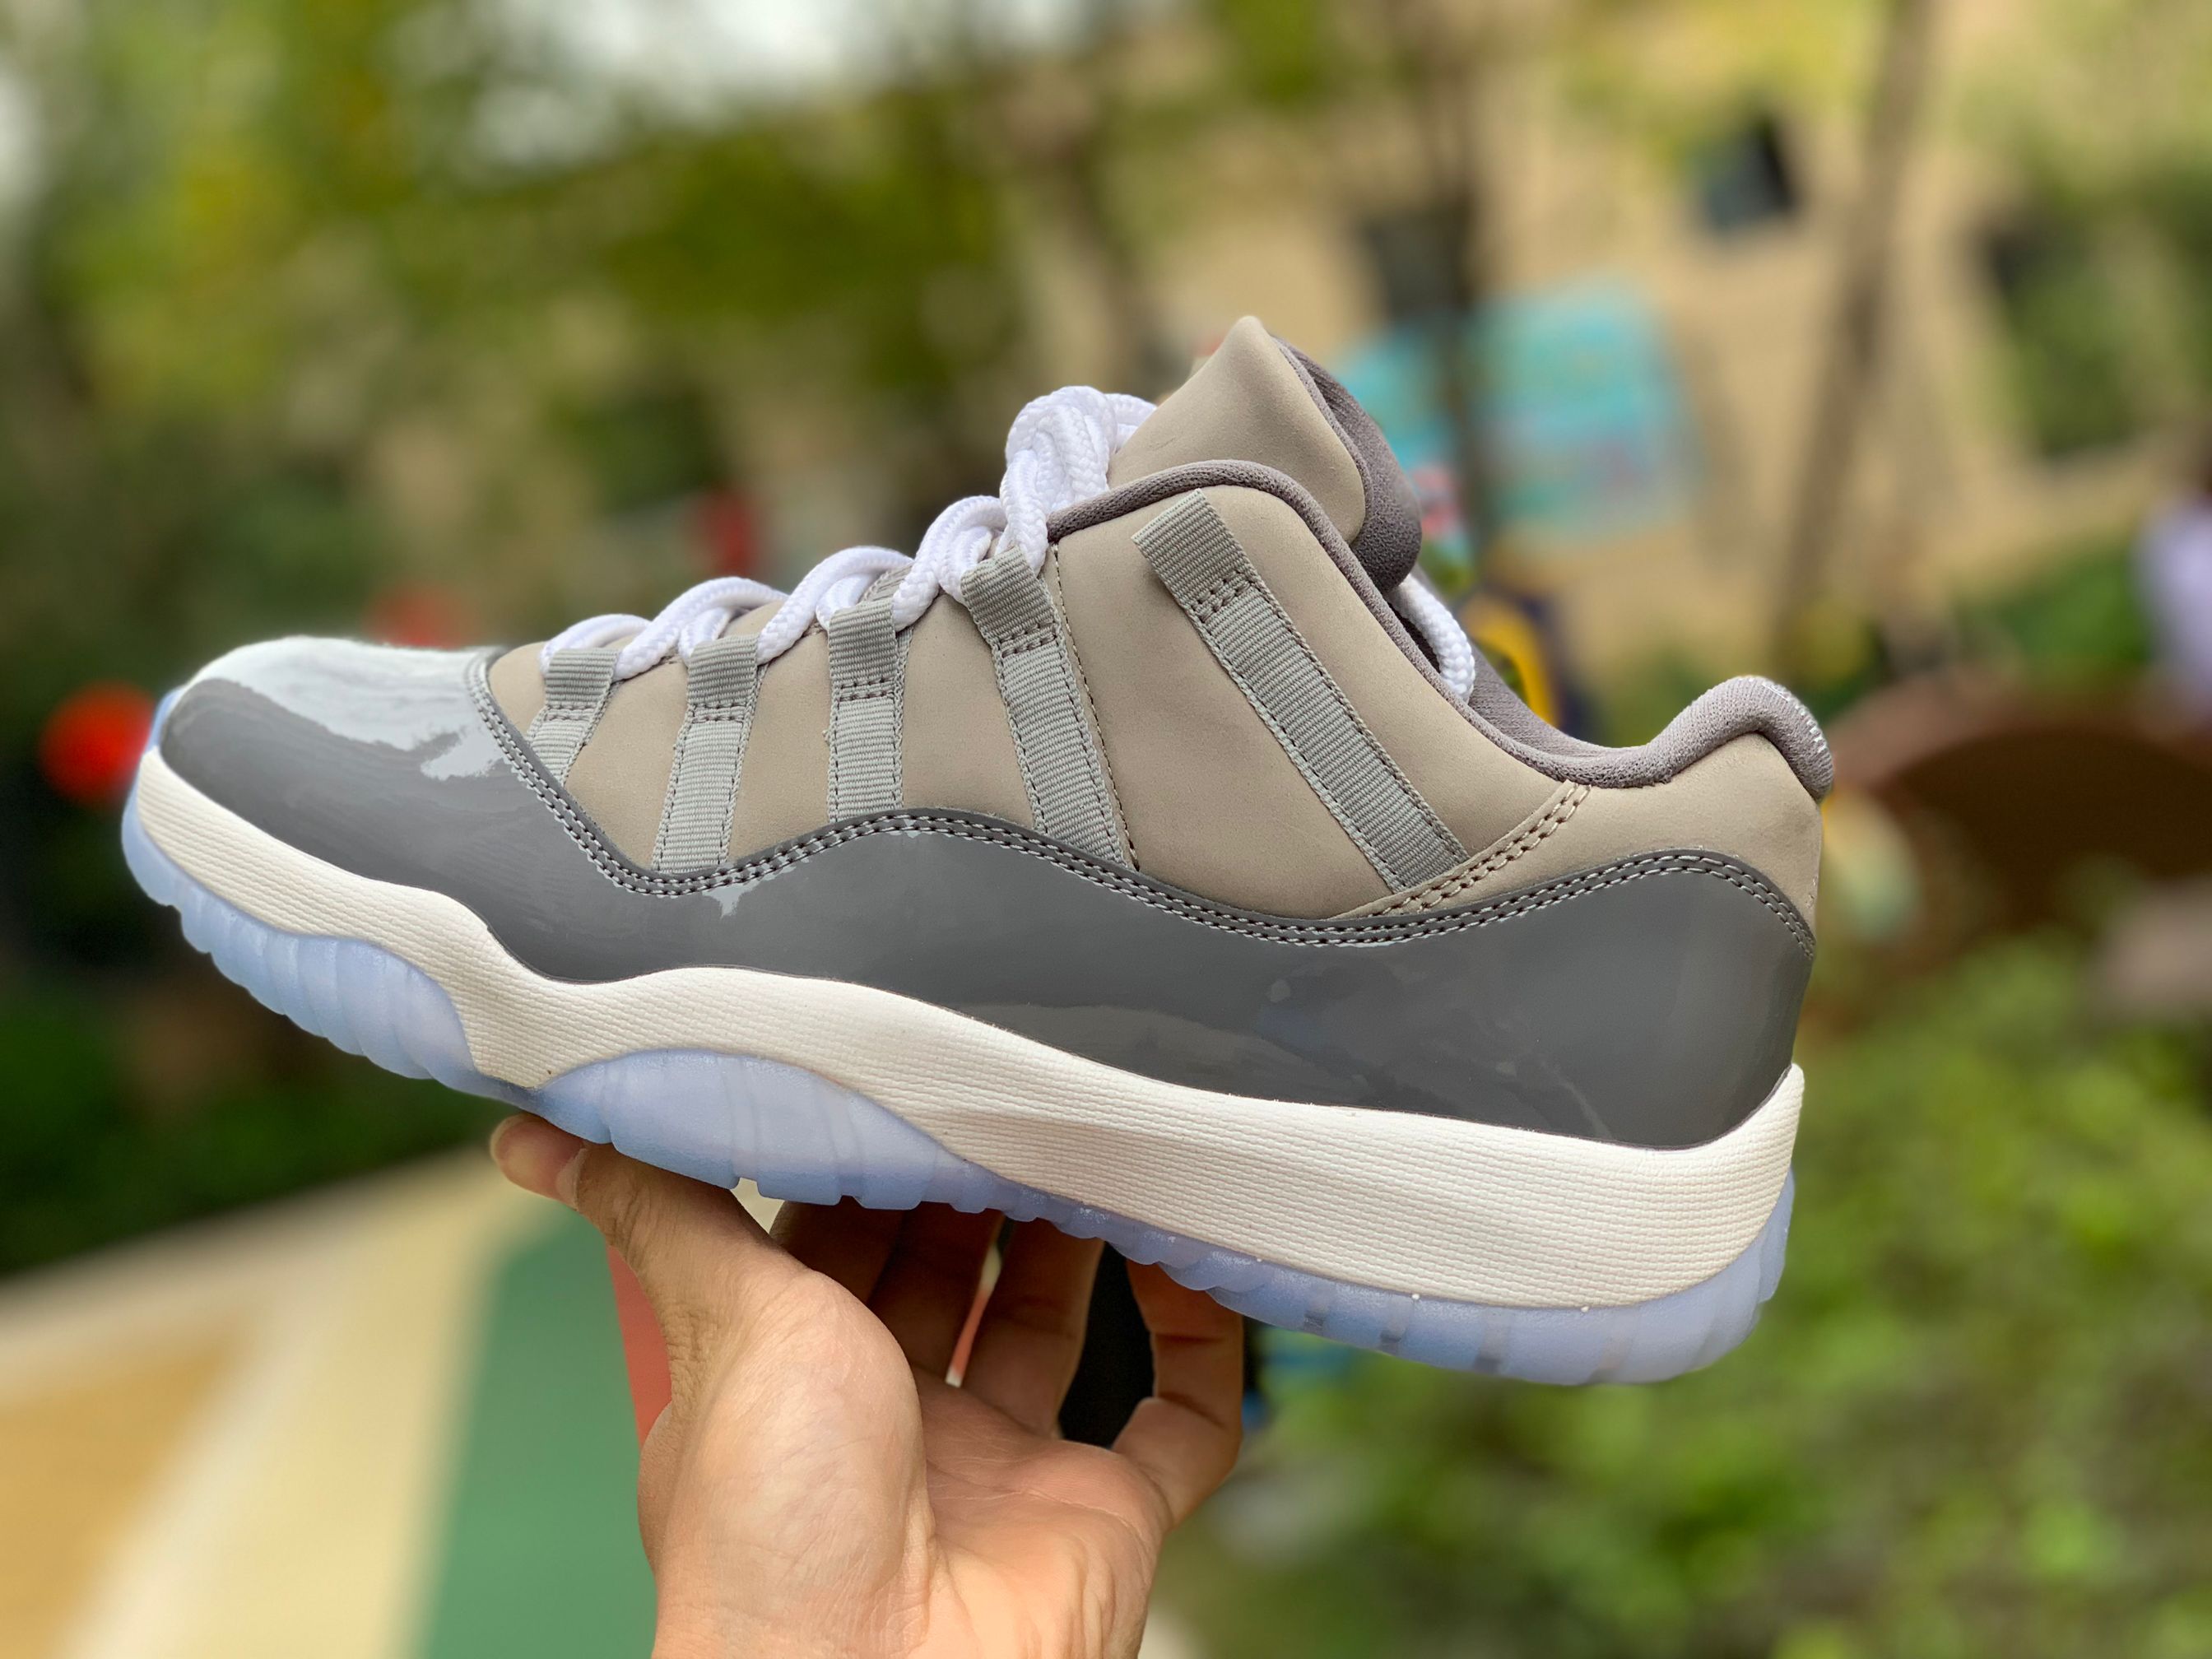 cool grey 11 low for sale